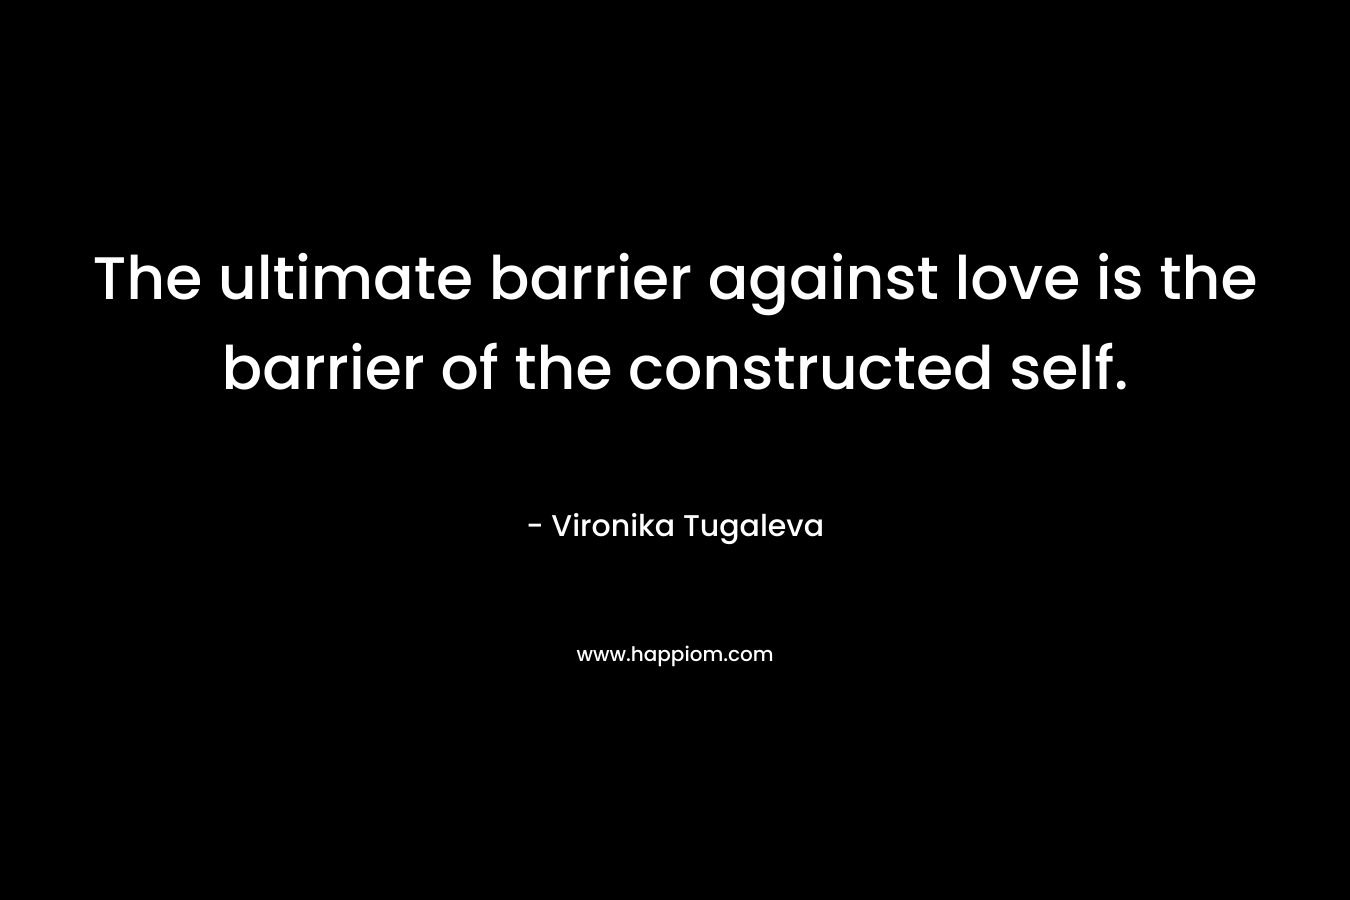 The ultimate barrier against love is the barrier of the constructed self. – Vironika Tugaleva